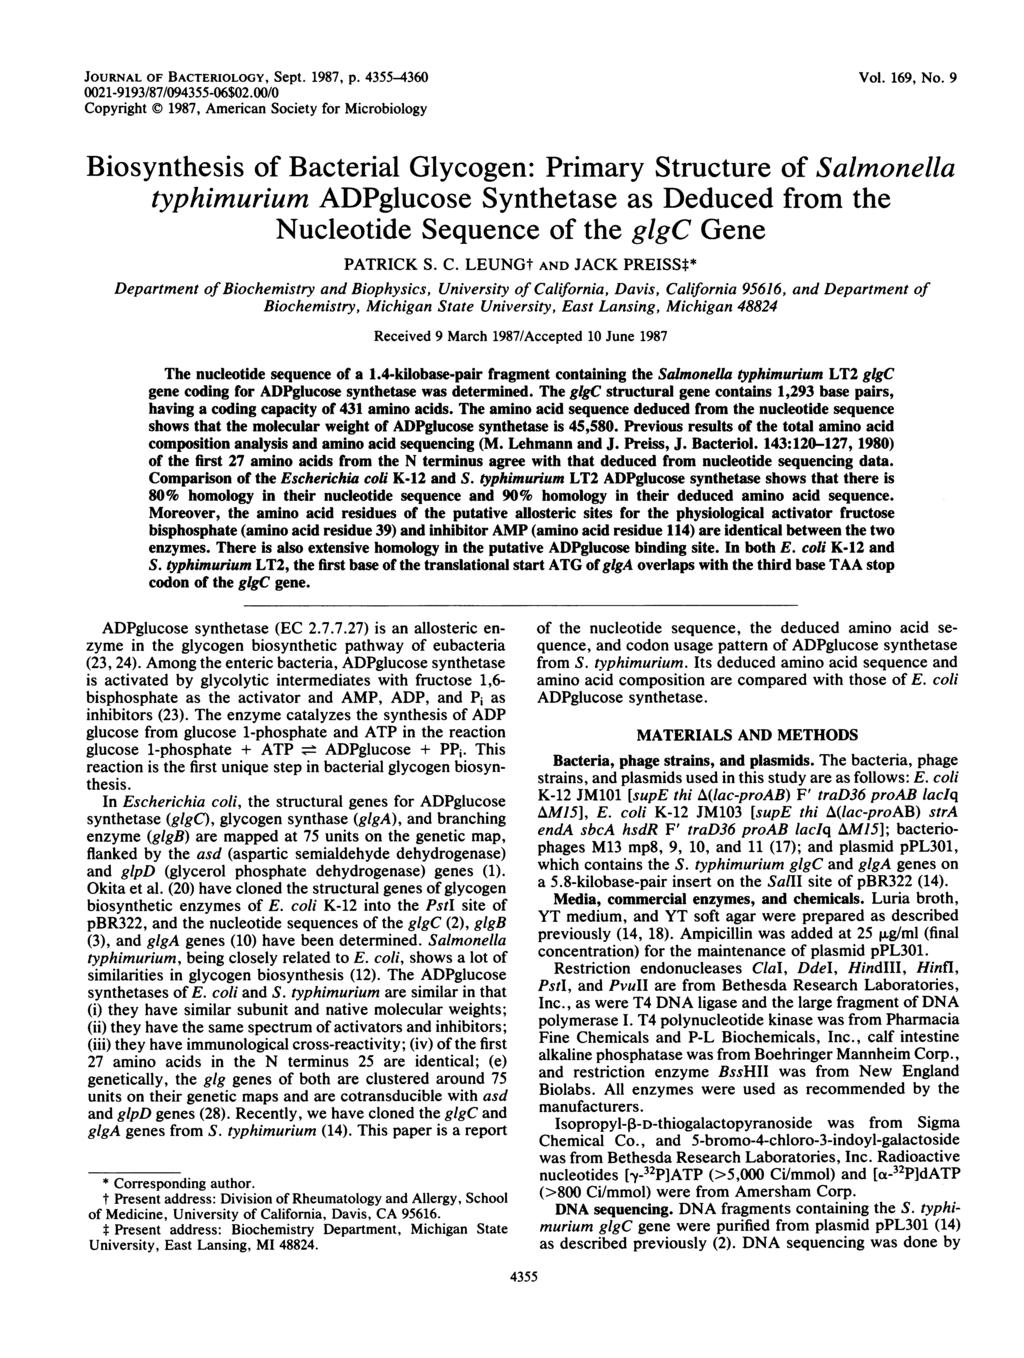 JOURNAL OF BACTERIOLOGY, Sept. 1987, p. 4355-4360 0021-9193/87/094355-06$02.00/0 Copyright X) 1987, American Society for Microbiology Vol. 169, No.